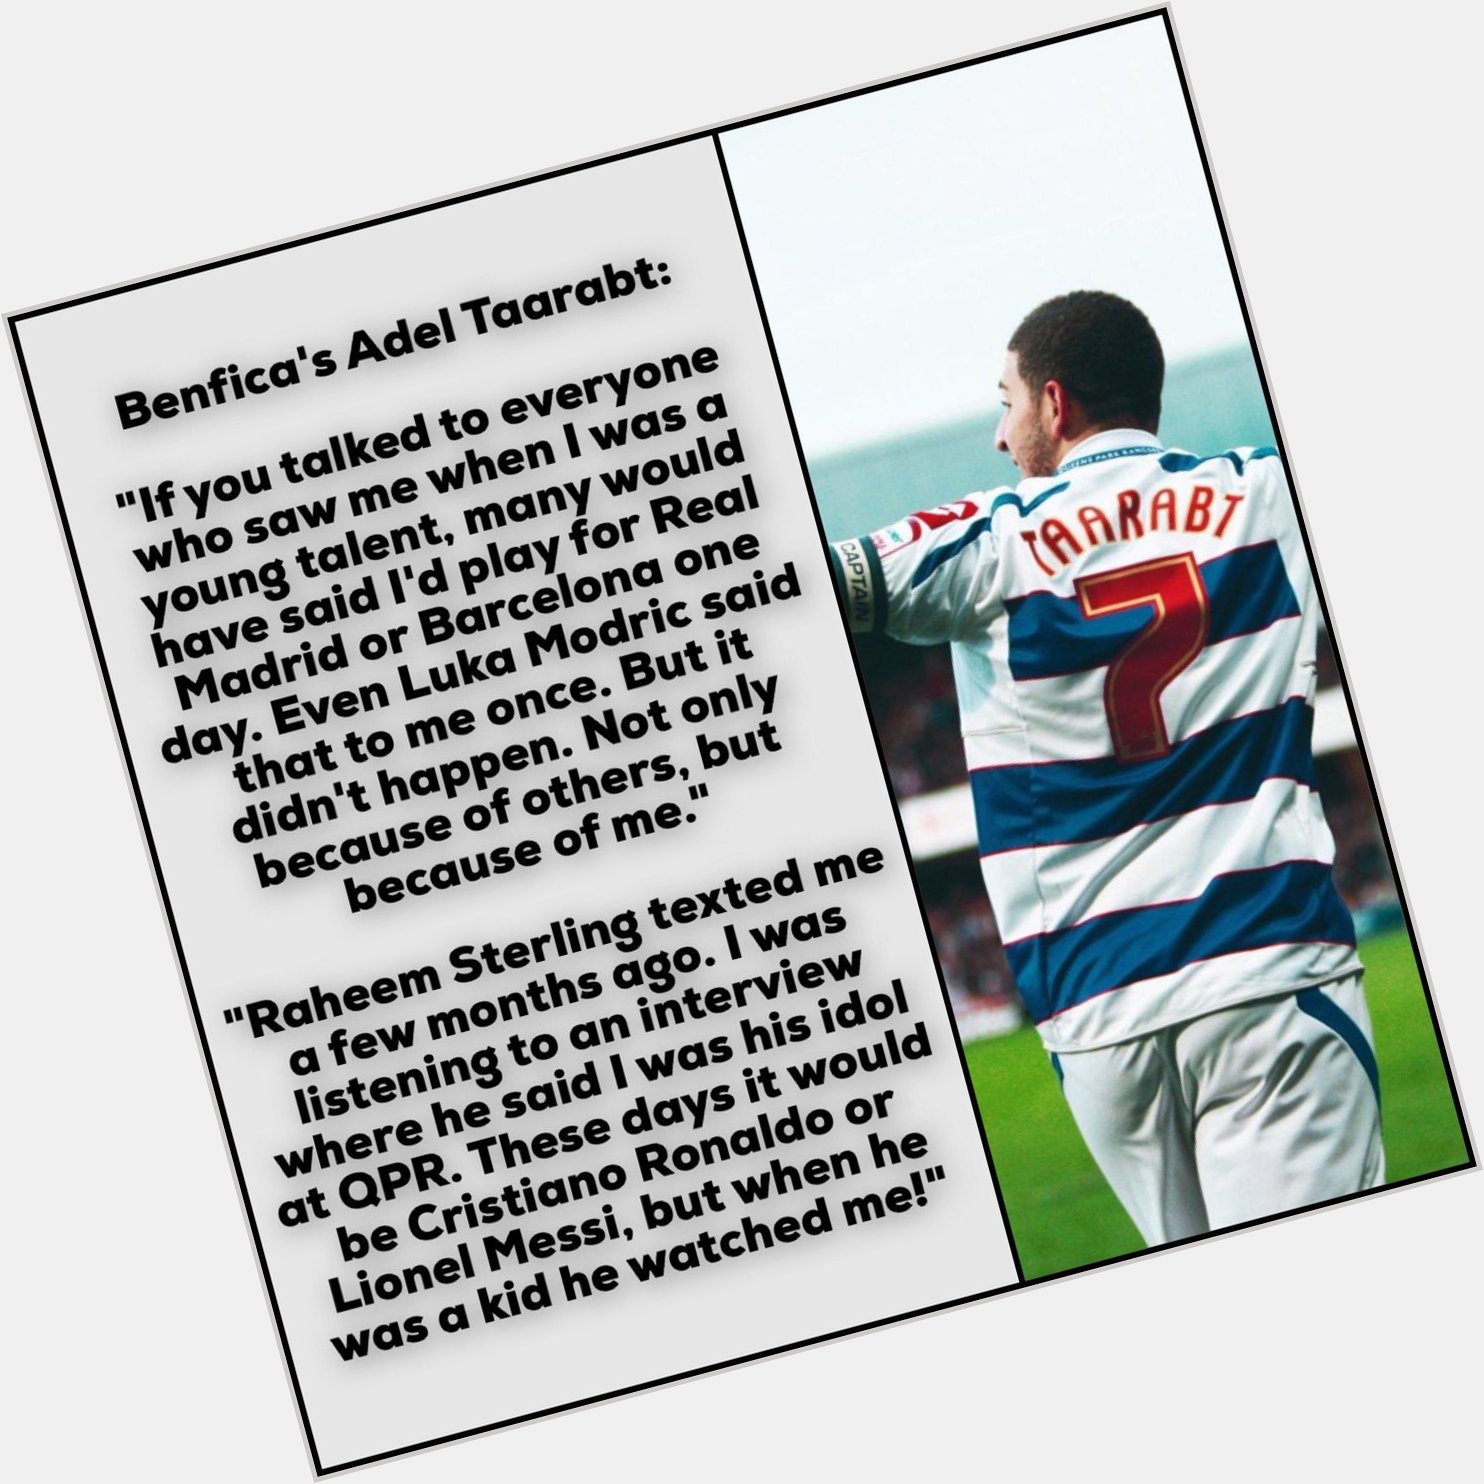 Happy Birthday to Adel Taarabt, who turns 32 today.  